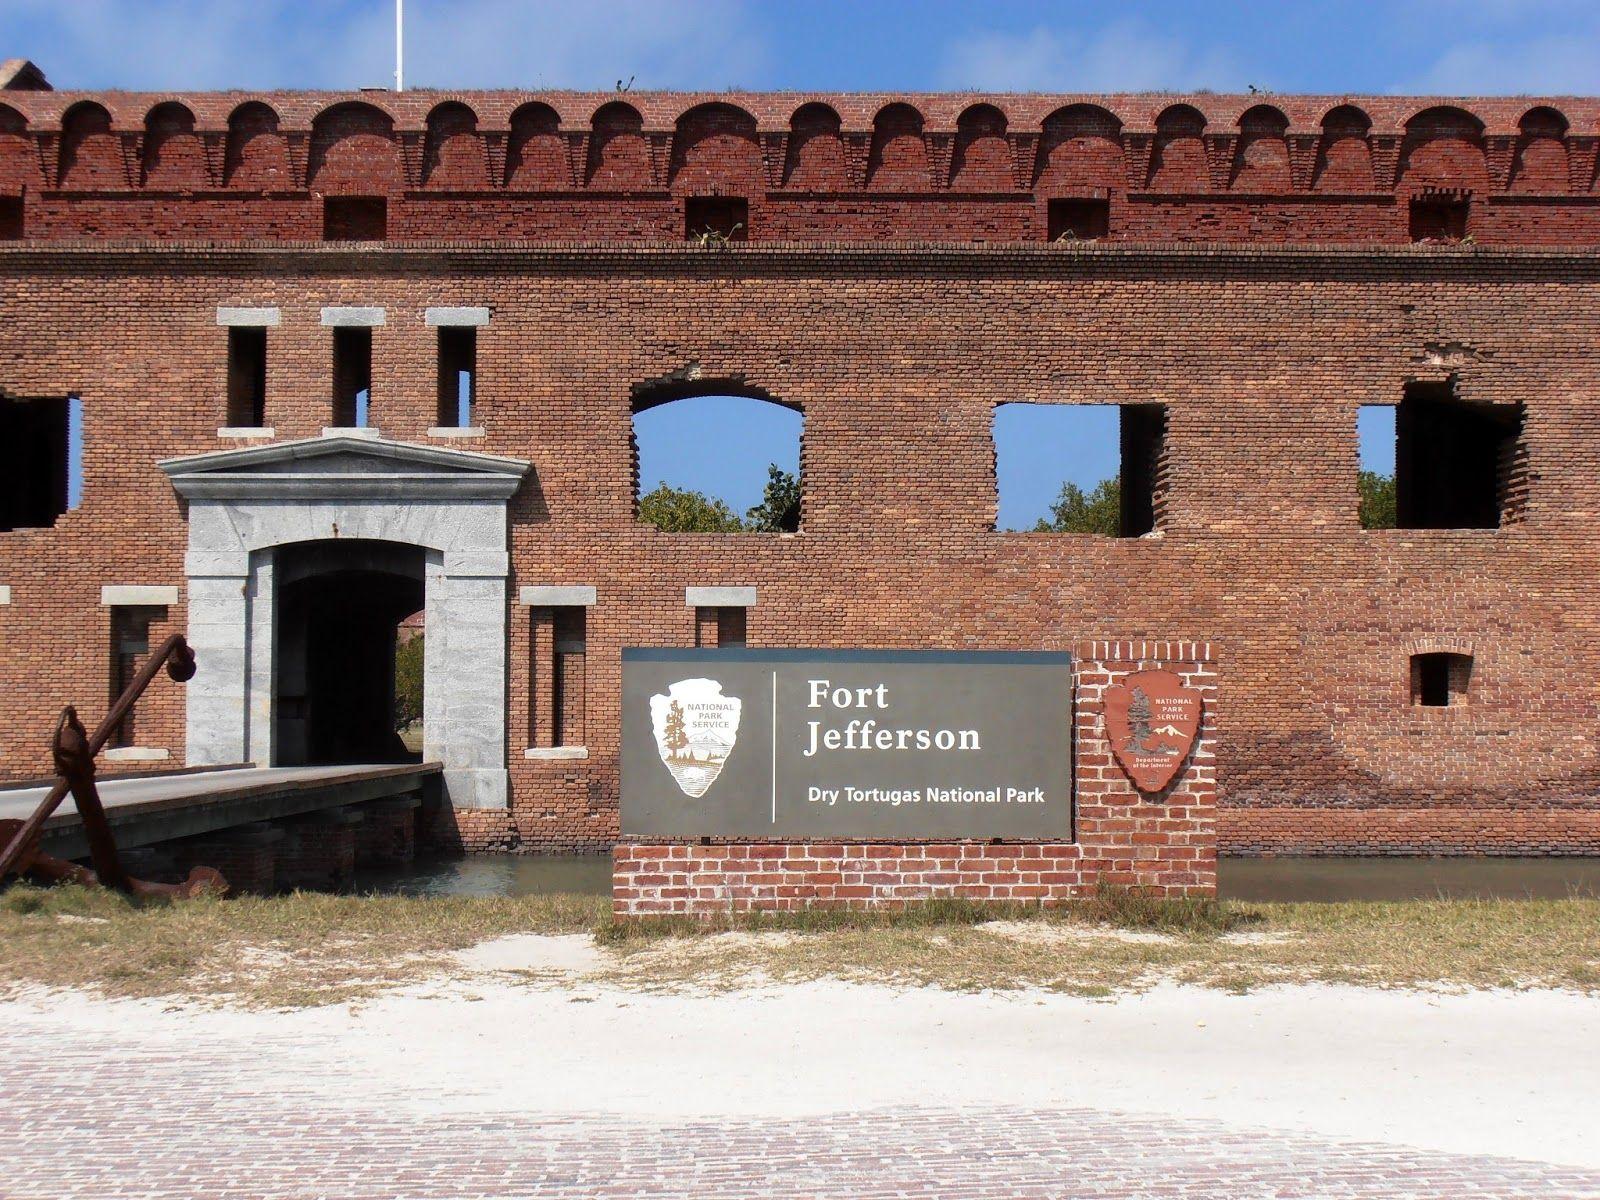 American Travel Journal Dry Tortugas National Park